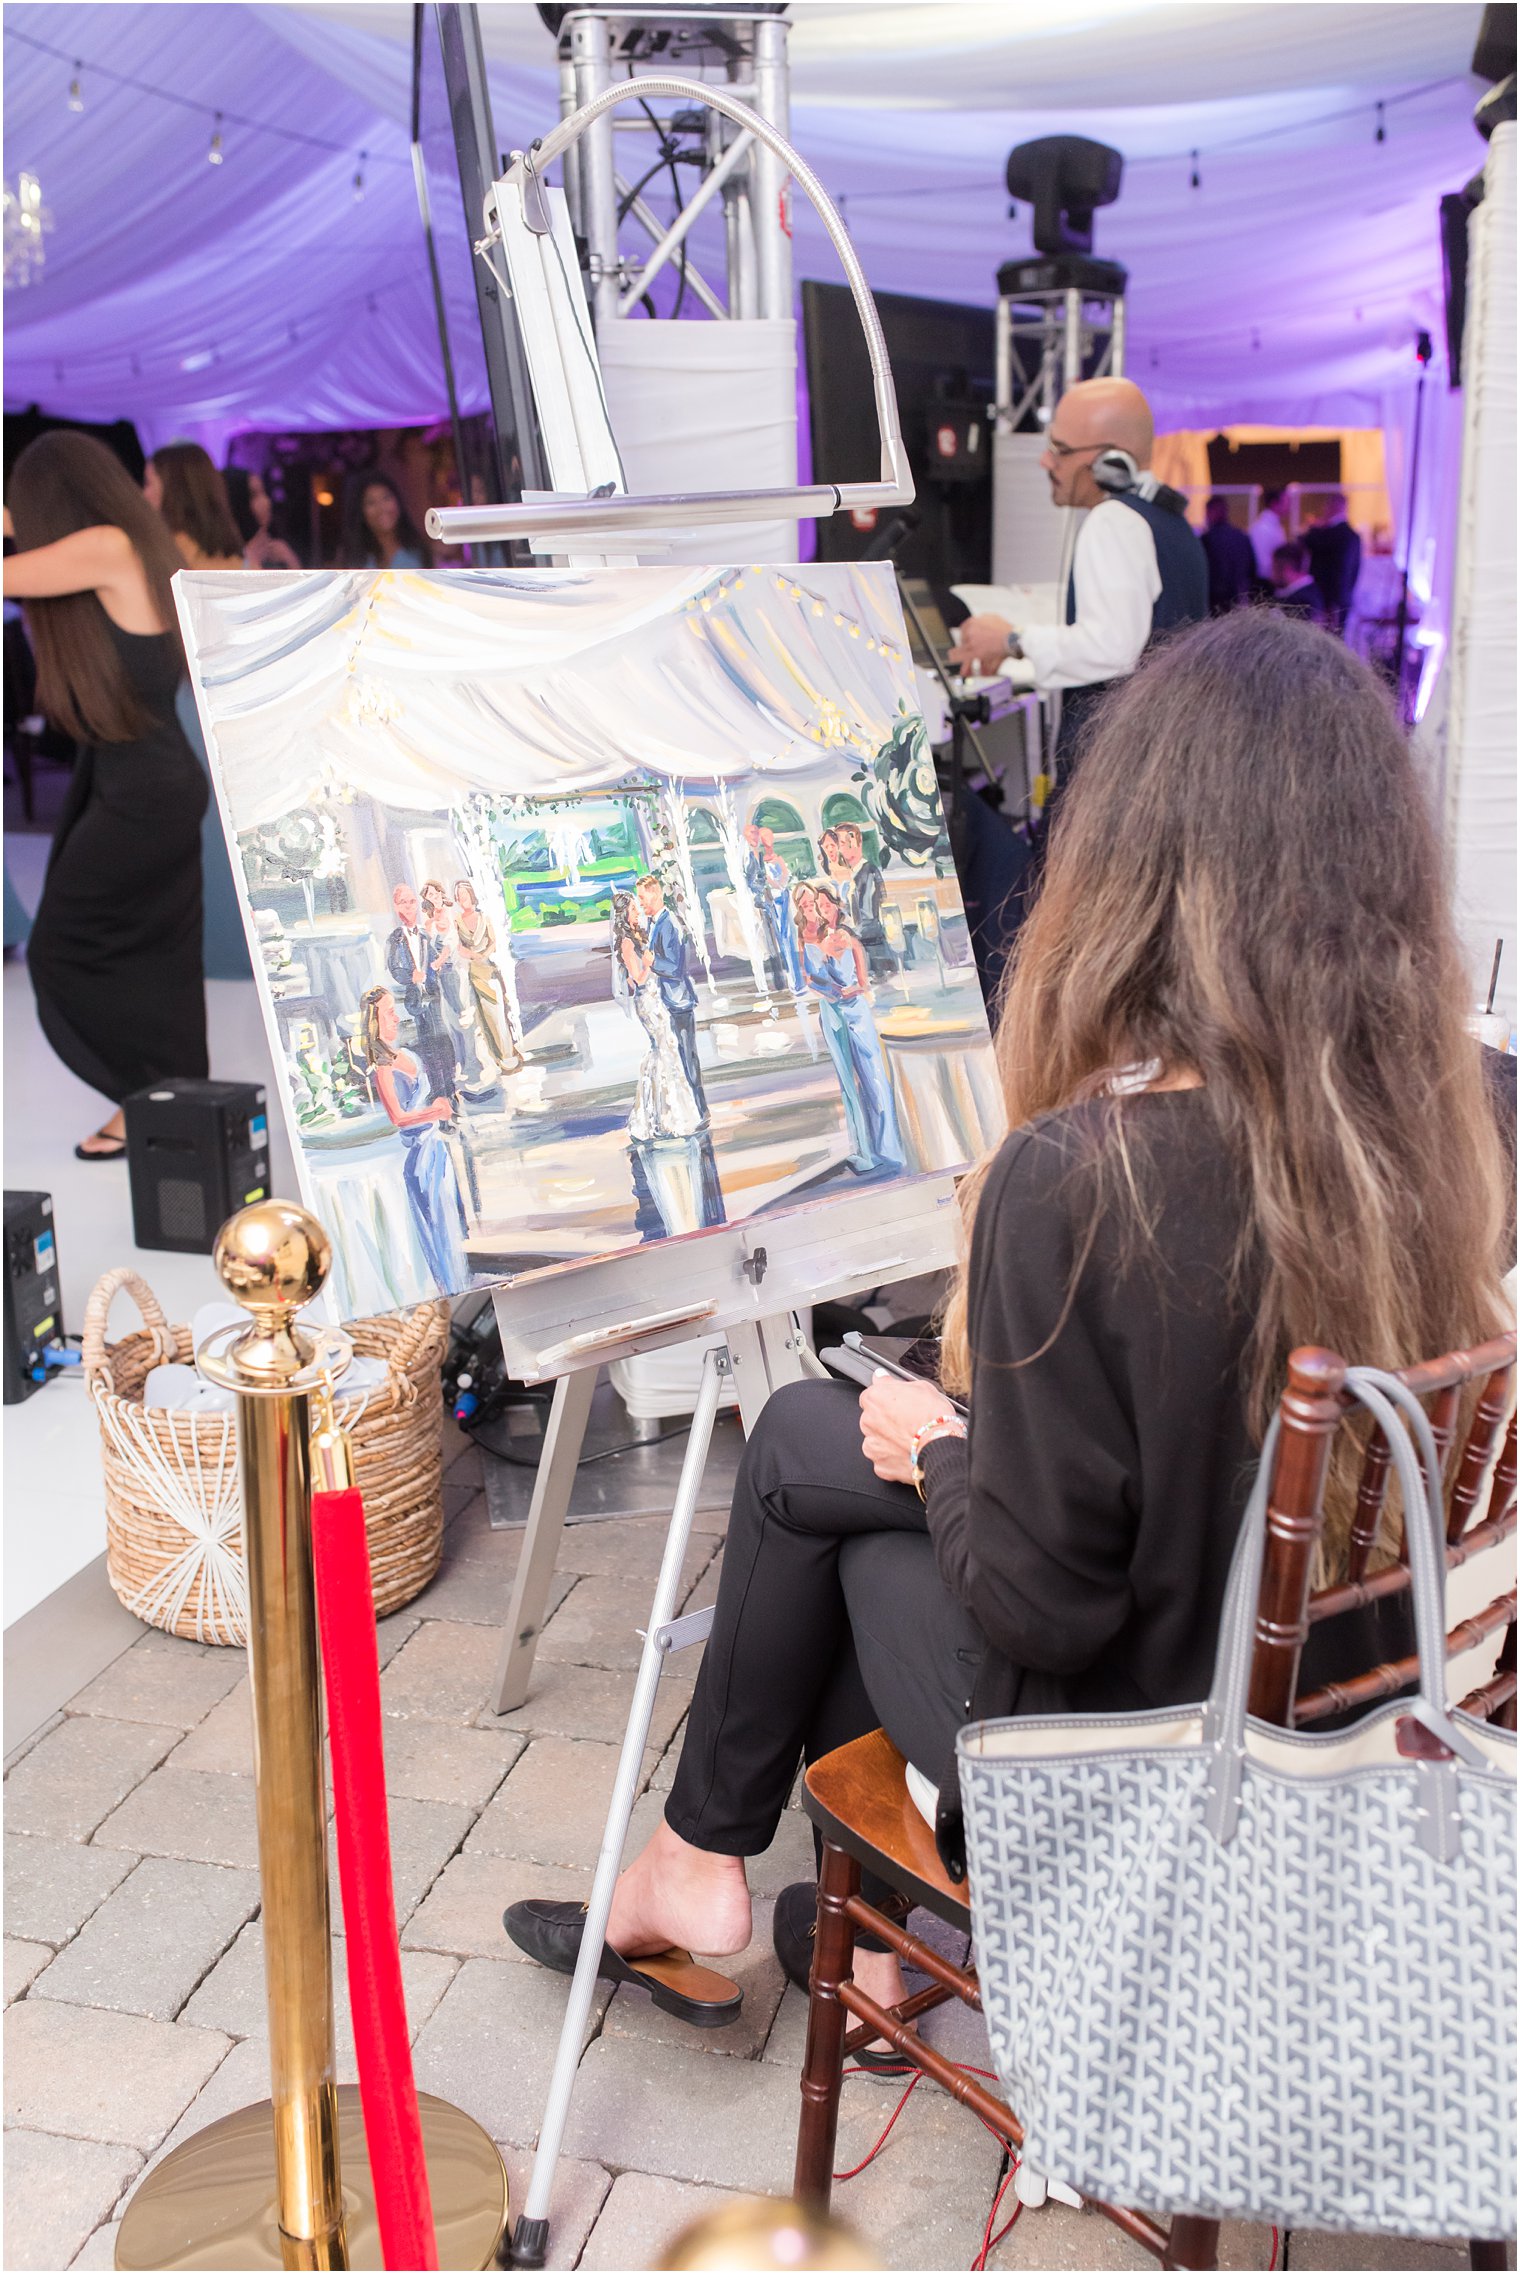 live painter at Windows on the Water at Frogbridge wedding reception